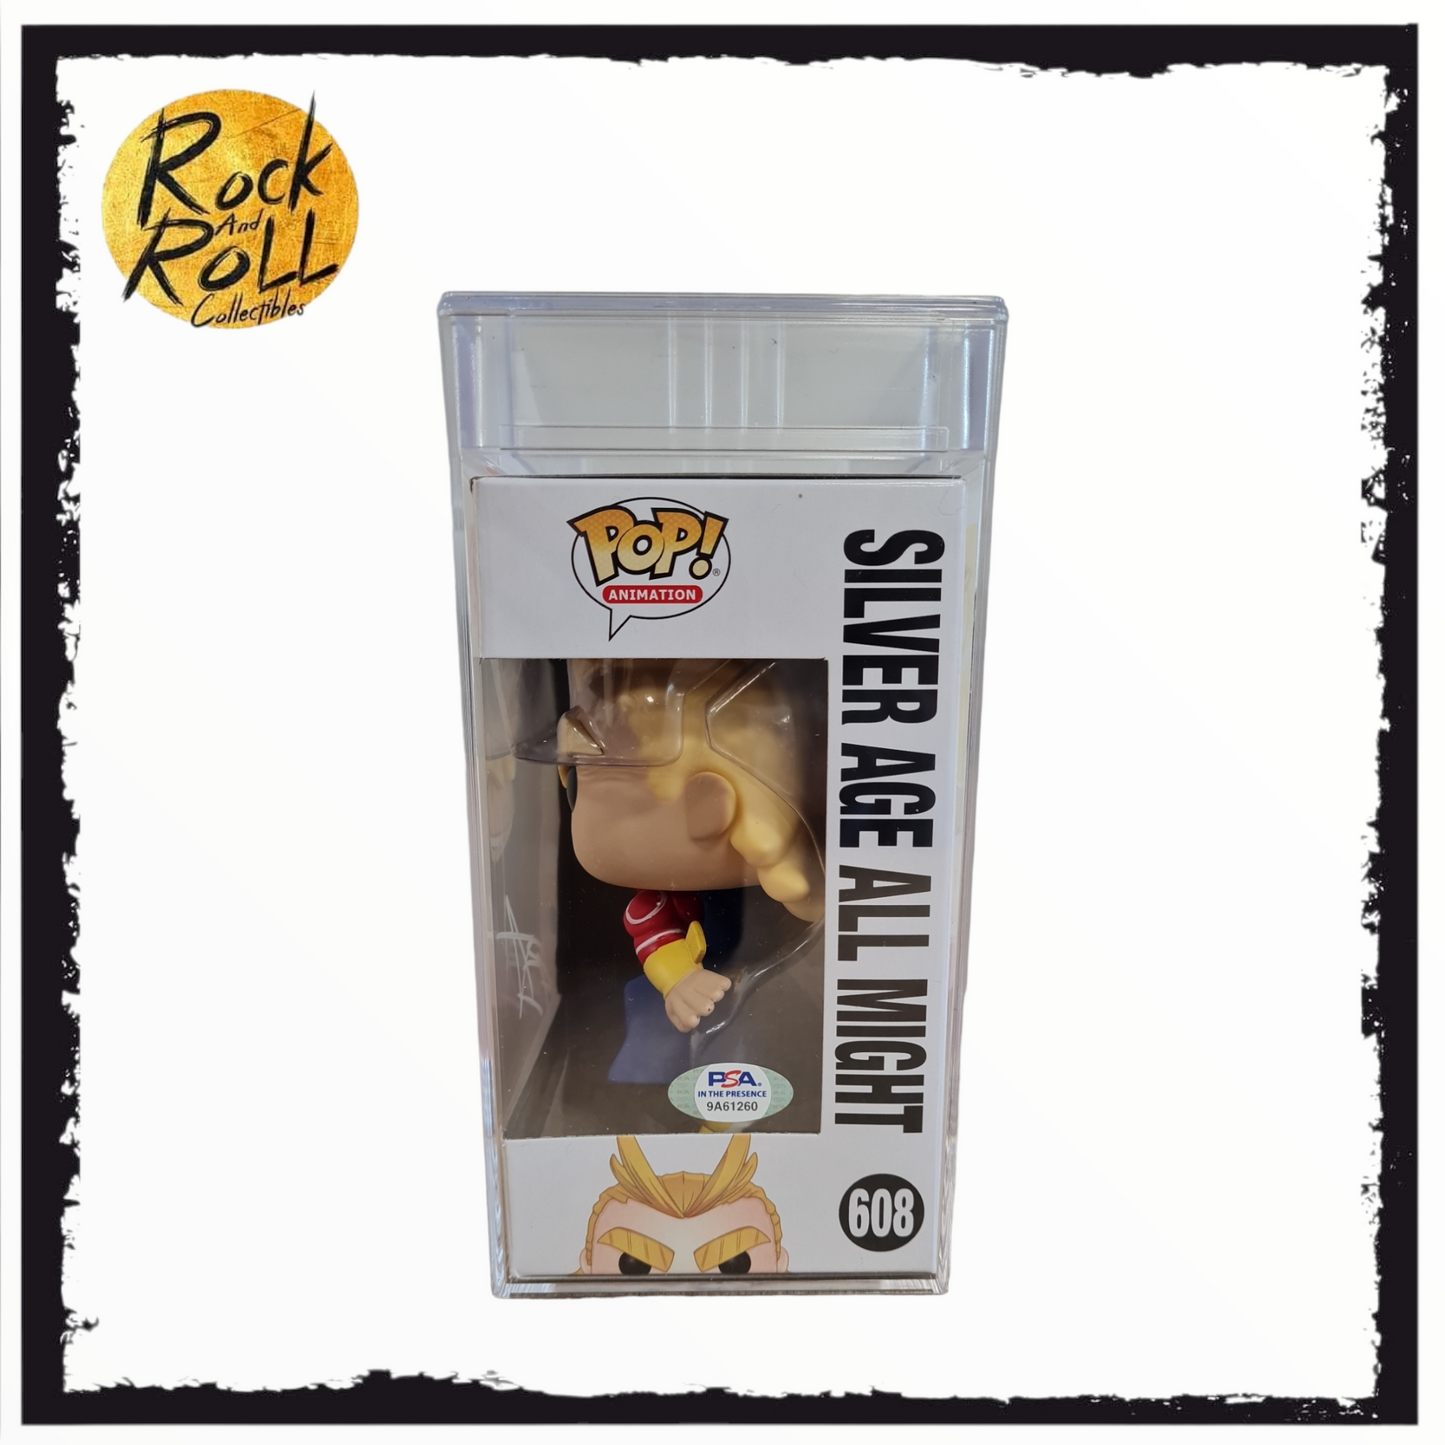 My Hero Academia - Silver Age All Might Funko Pop! #608 Signed by Christopher Sabat. PSA COA